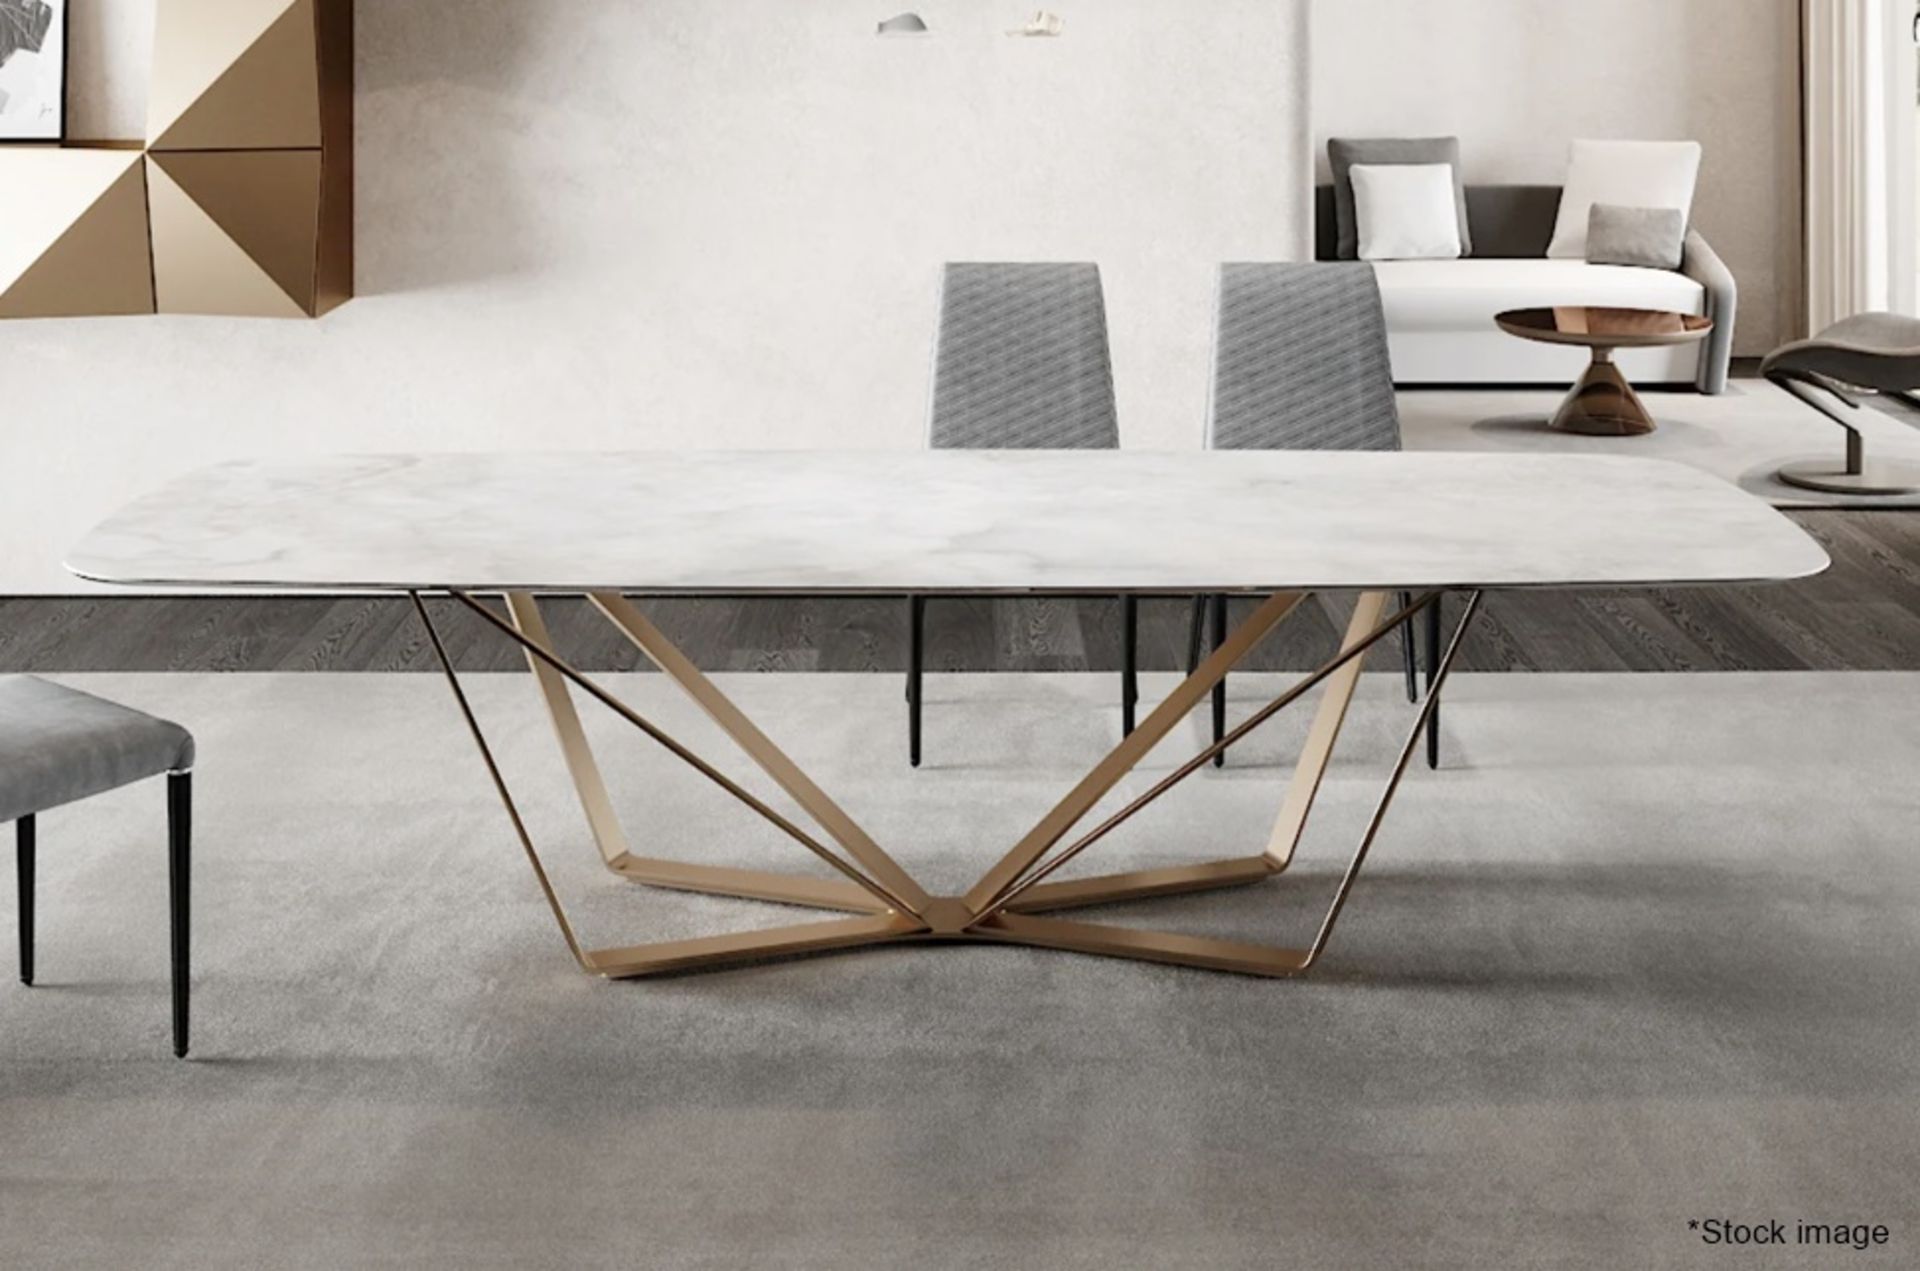 1 x REFLEX Designer Marble-topped Dining Table with a Triangular Steel Base - RRP £8,190 - Bild 2 aus 19